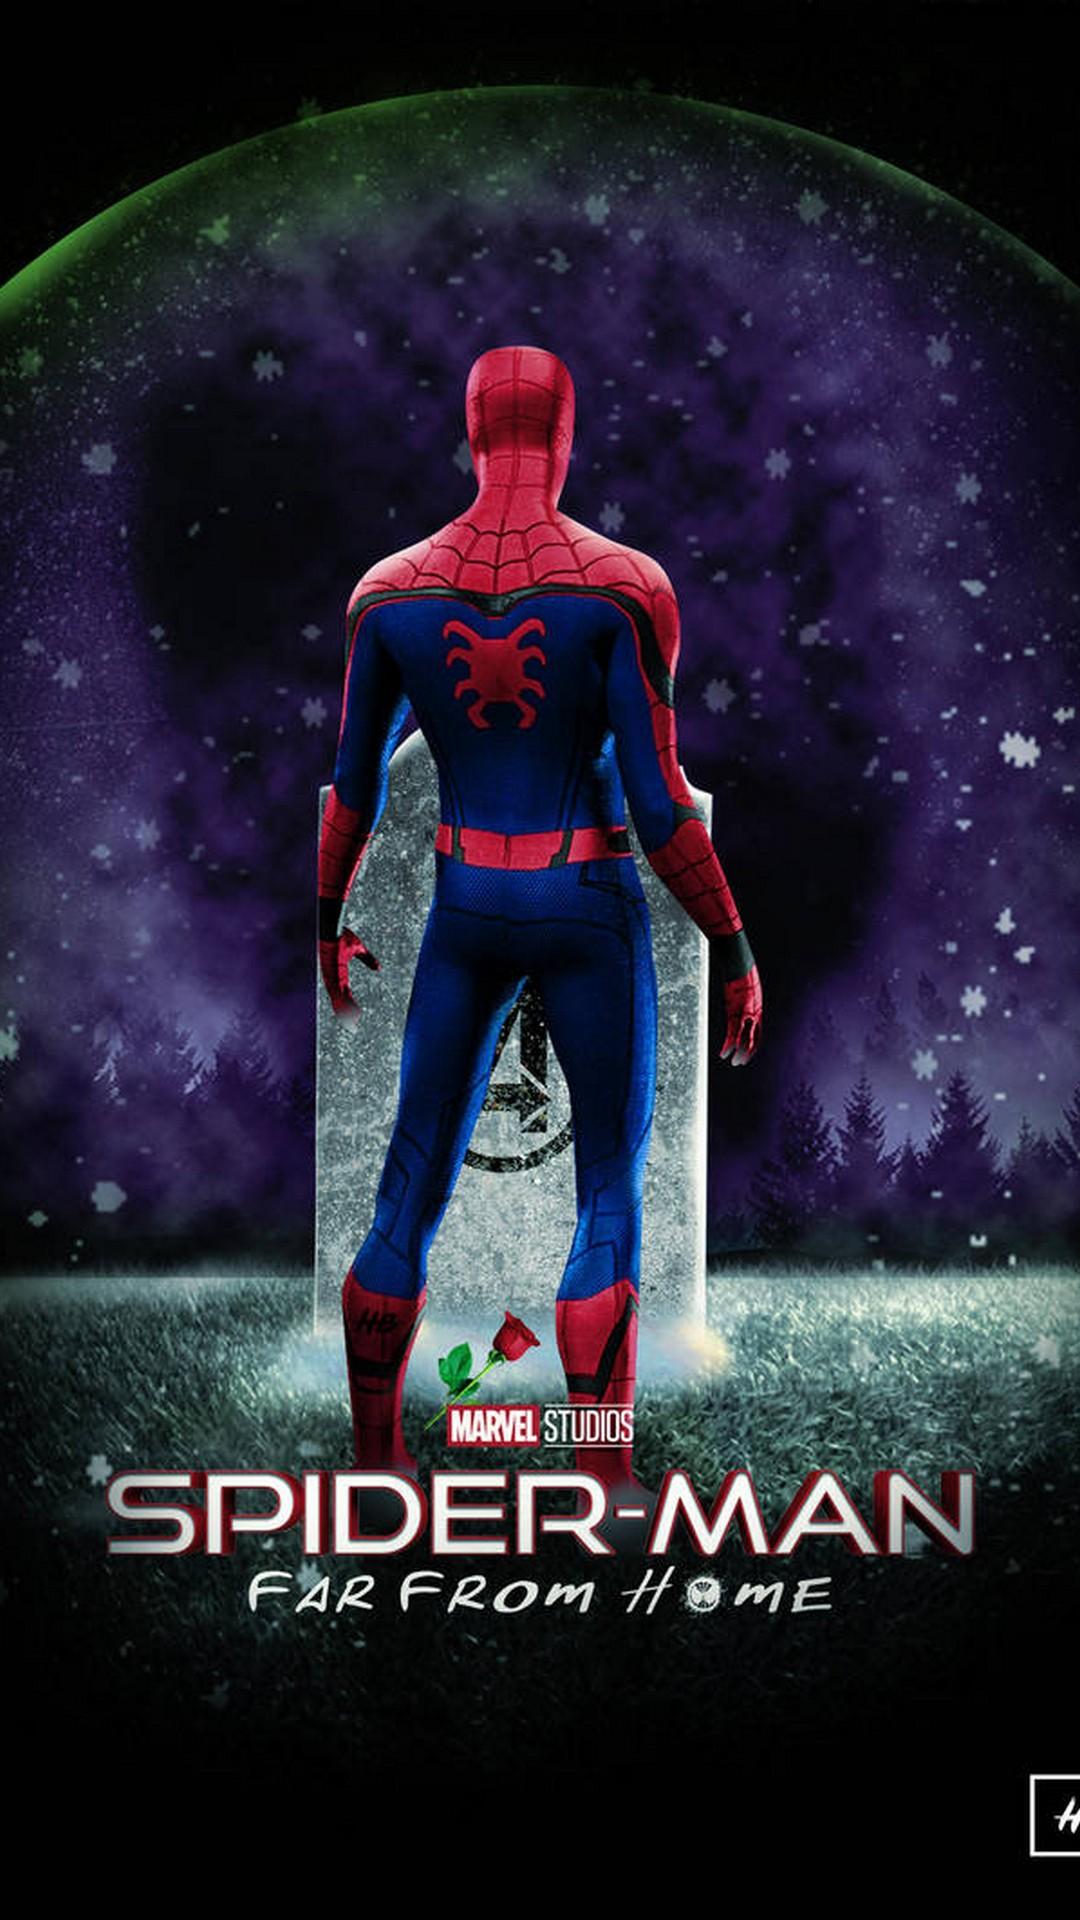 Spider Man 2019 Far From Home IPhone Wallpaper Movie